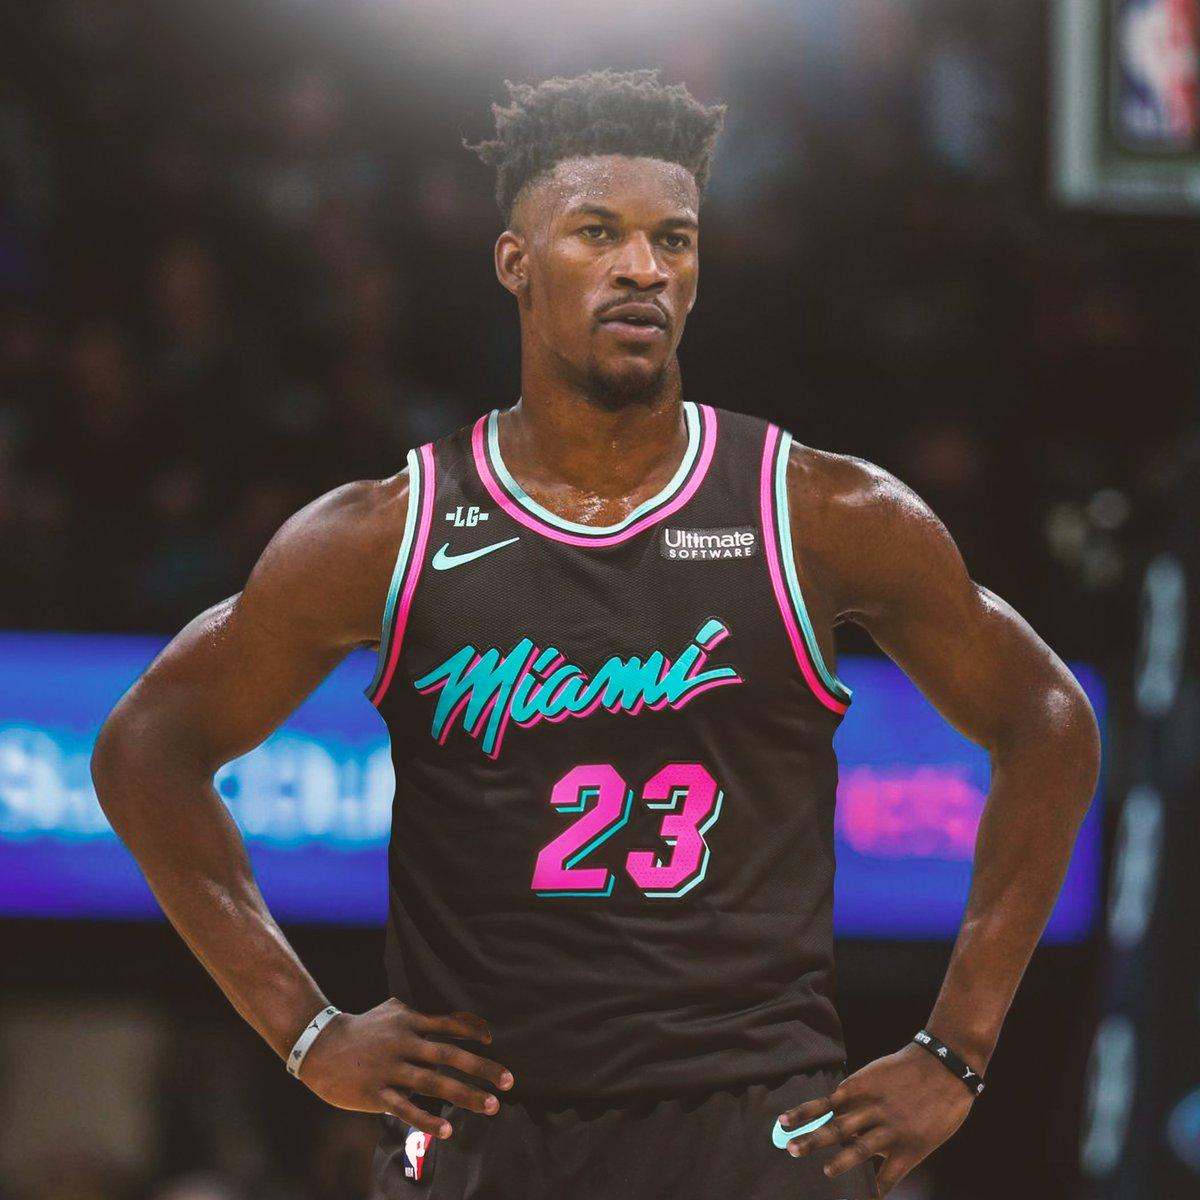 Your #MiamiHeat Friday Wallpaper featuring @JimmyButler! - Imgflip